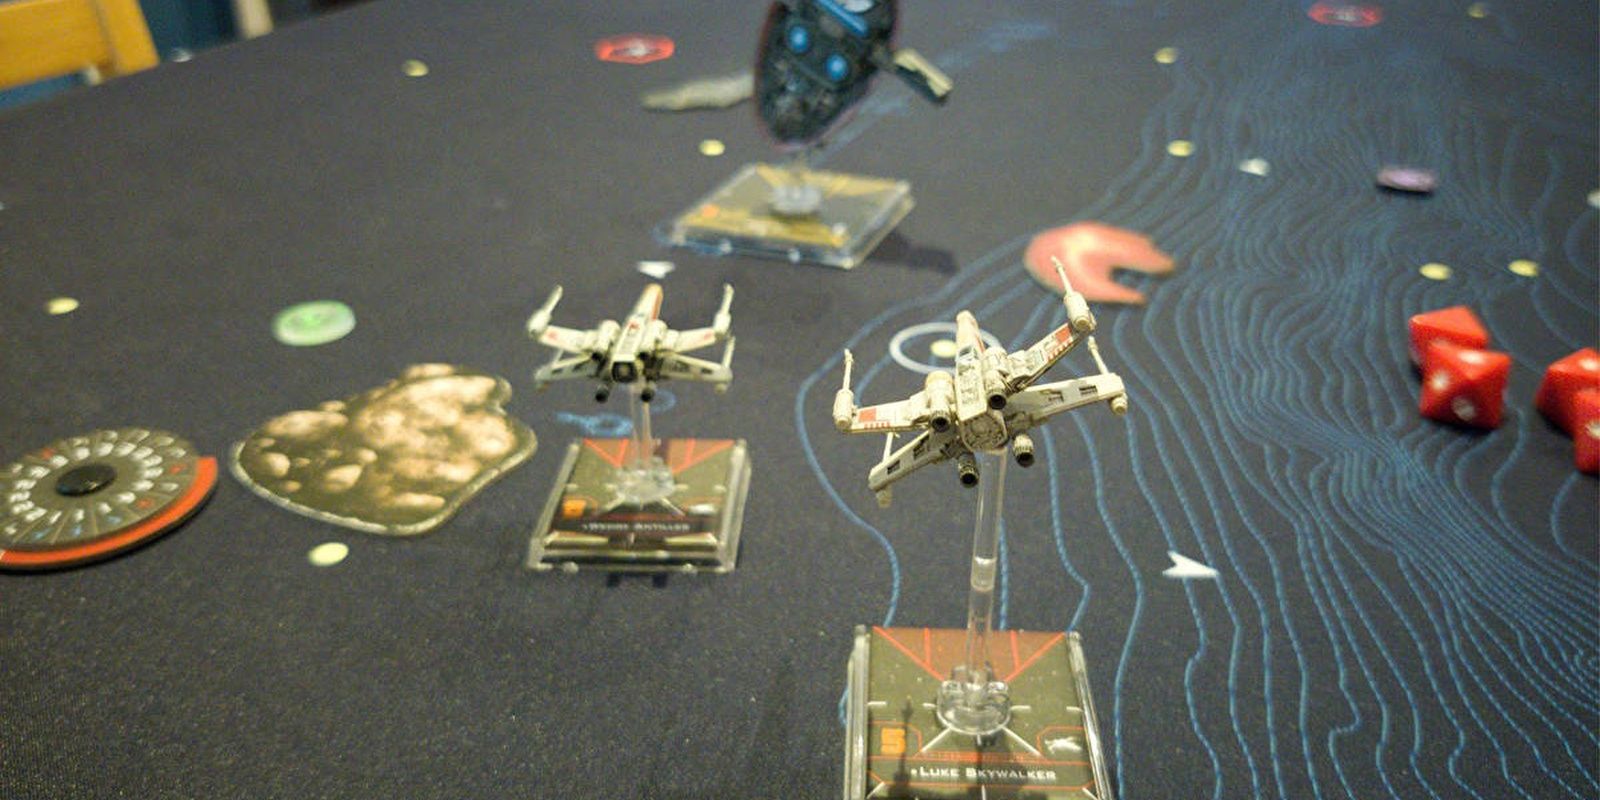 Star Wars X-Wing Miniatures Board Game Being Played